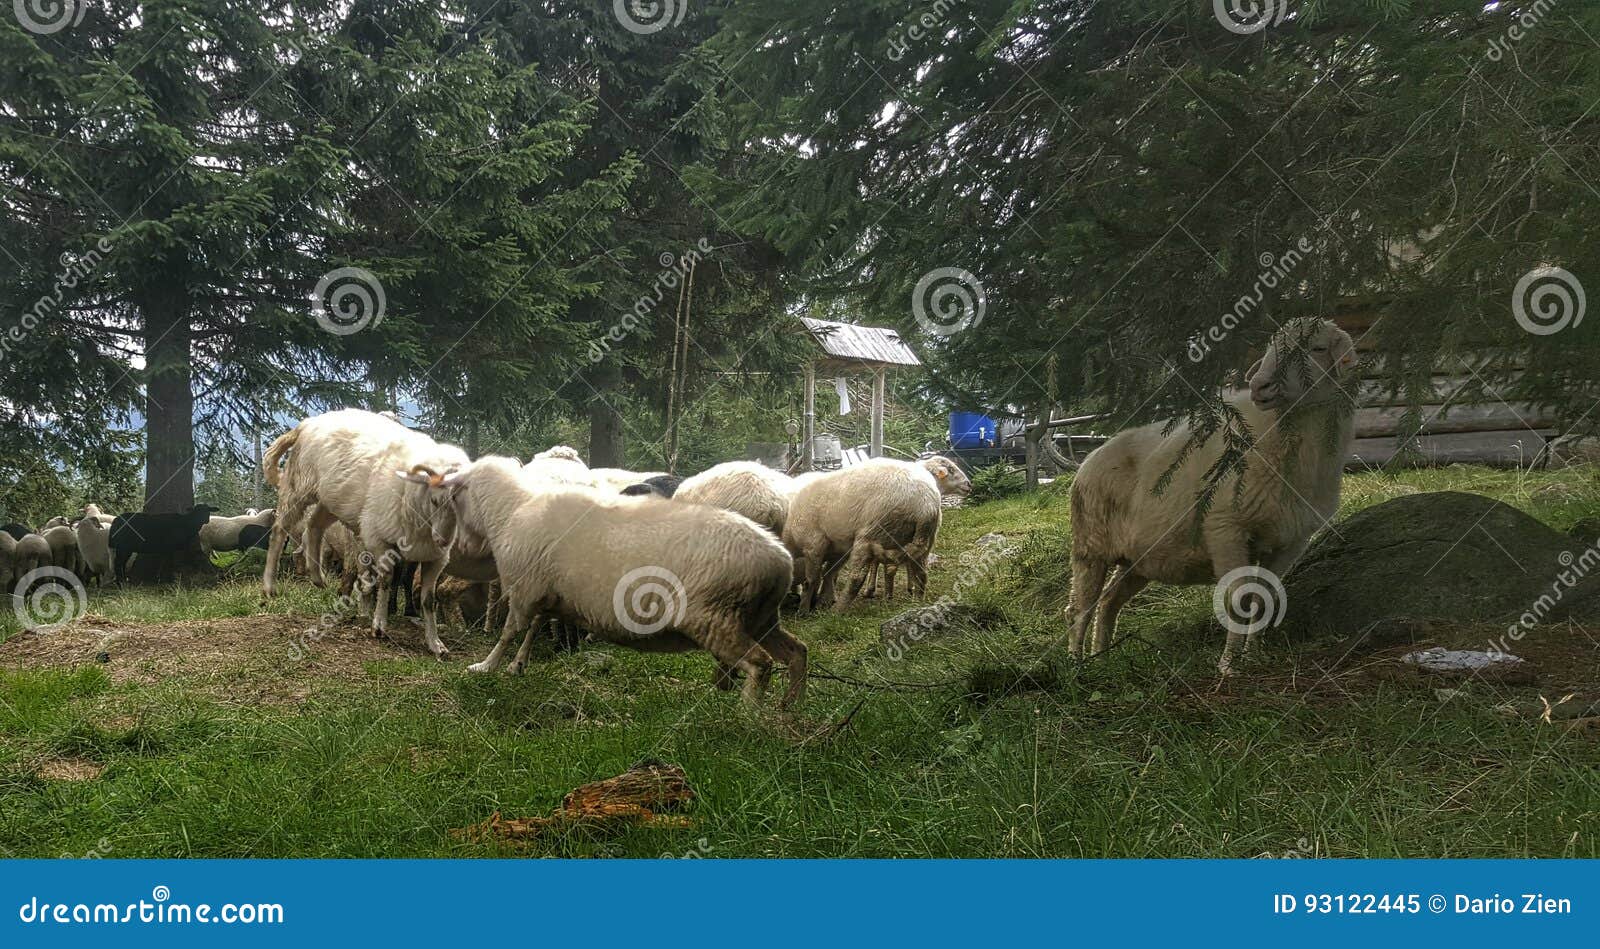 sheep green clearing holydays great picture wood